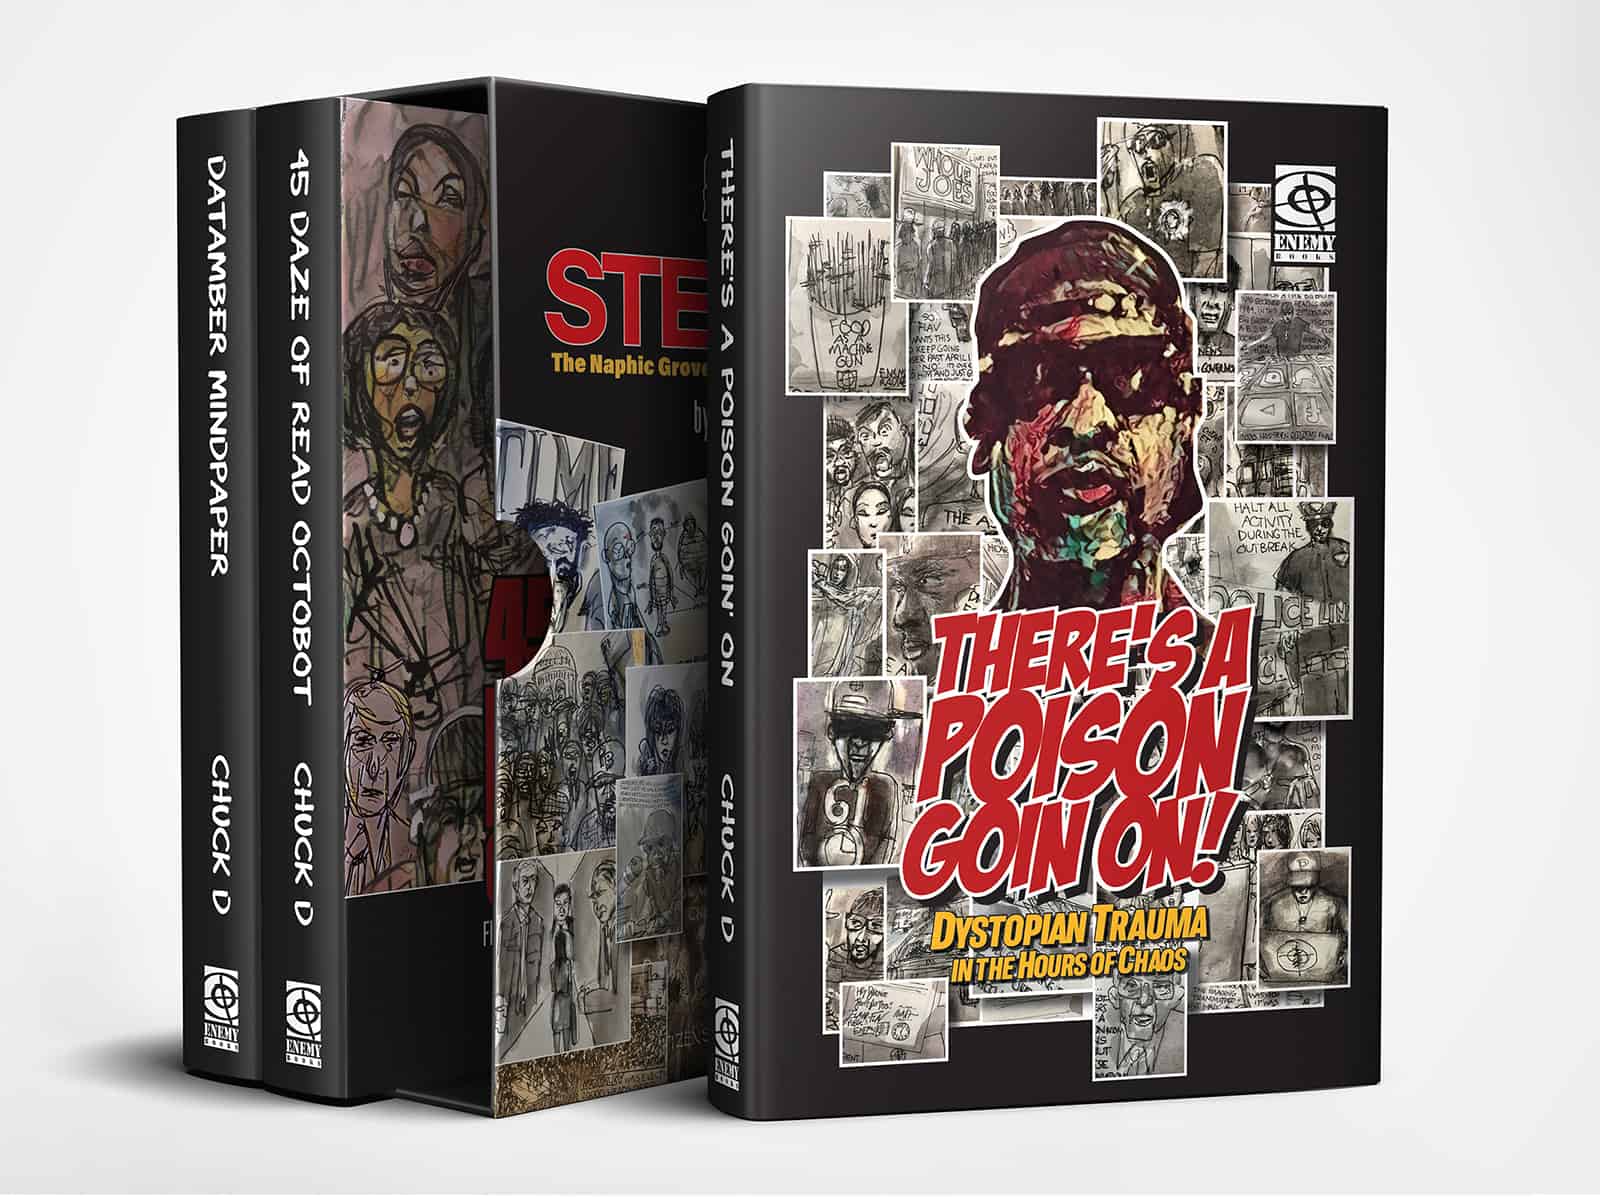 Experience the Artistic Voice of Chuck D in 'STEWdio: The Naphic Grovel ARTrilogy 17